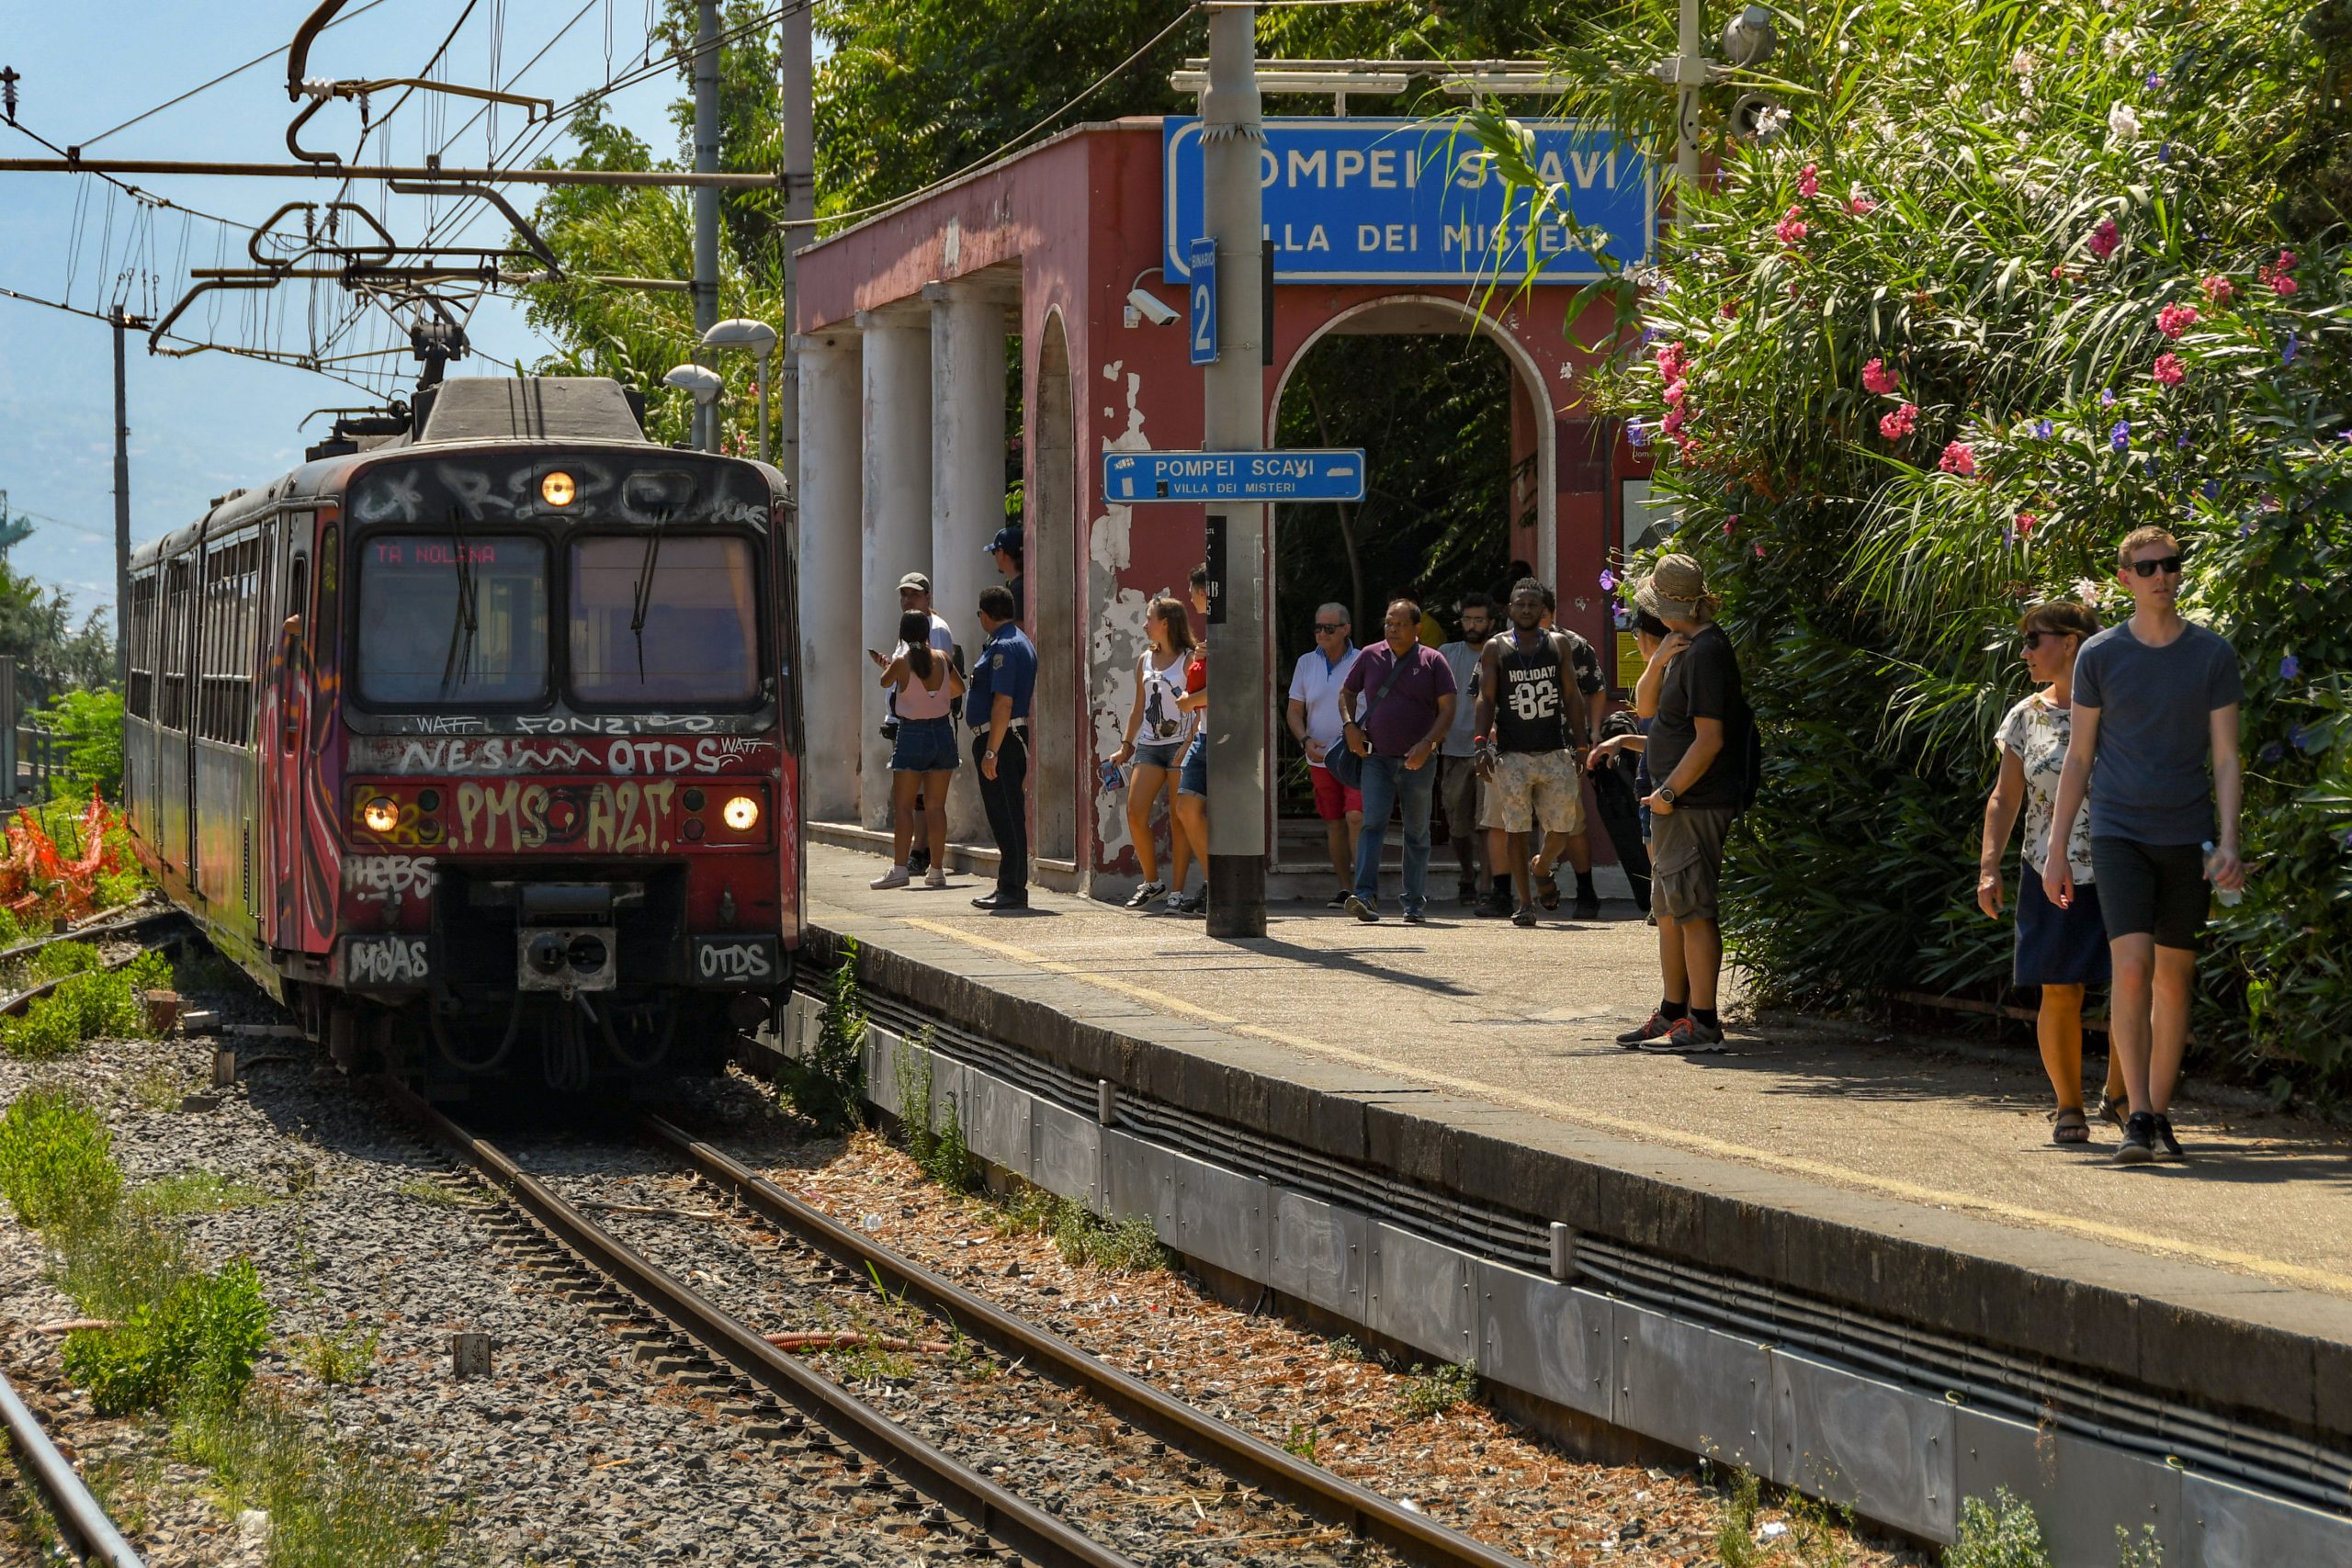 Electric train approaching Platform 2 of Pompeii Scavi station on its way to Naples in 2019. (Shutterstock)